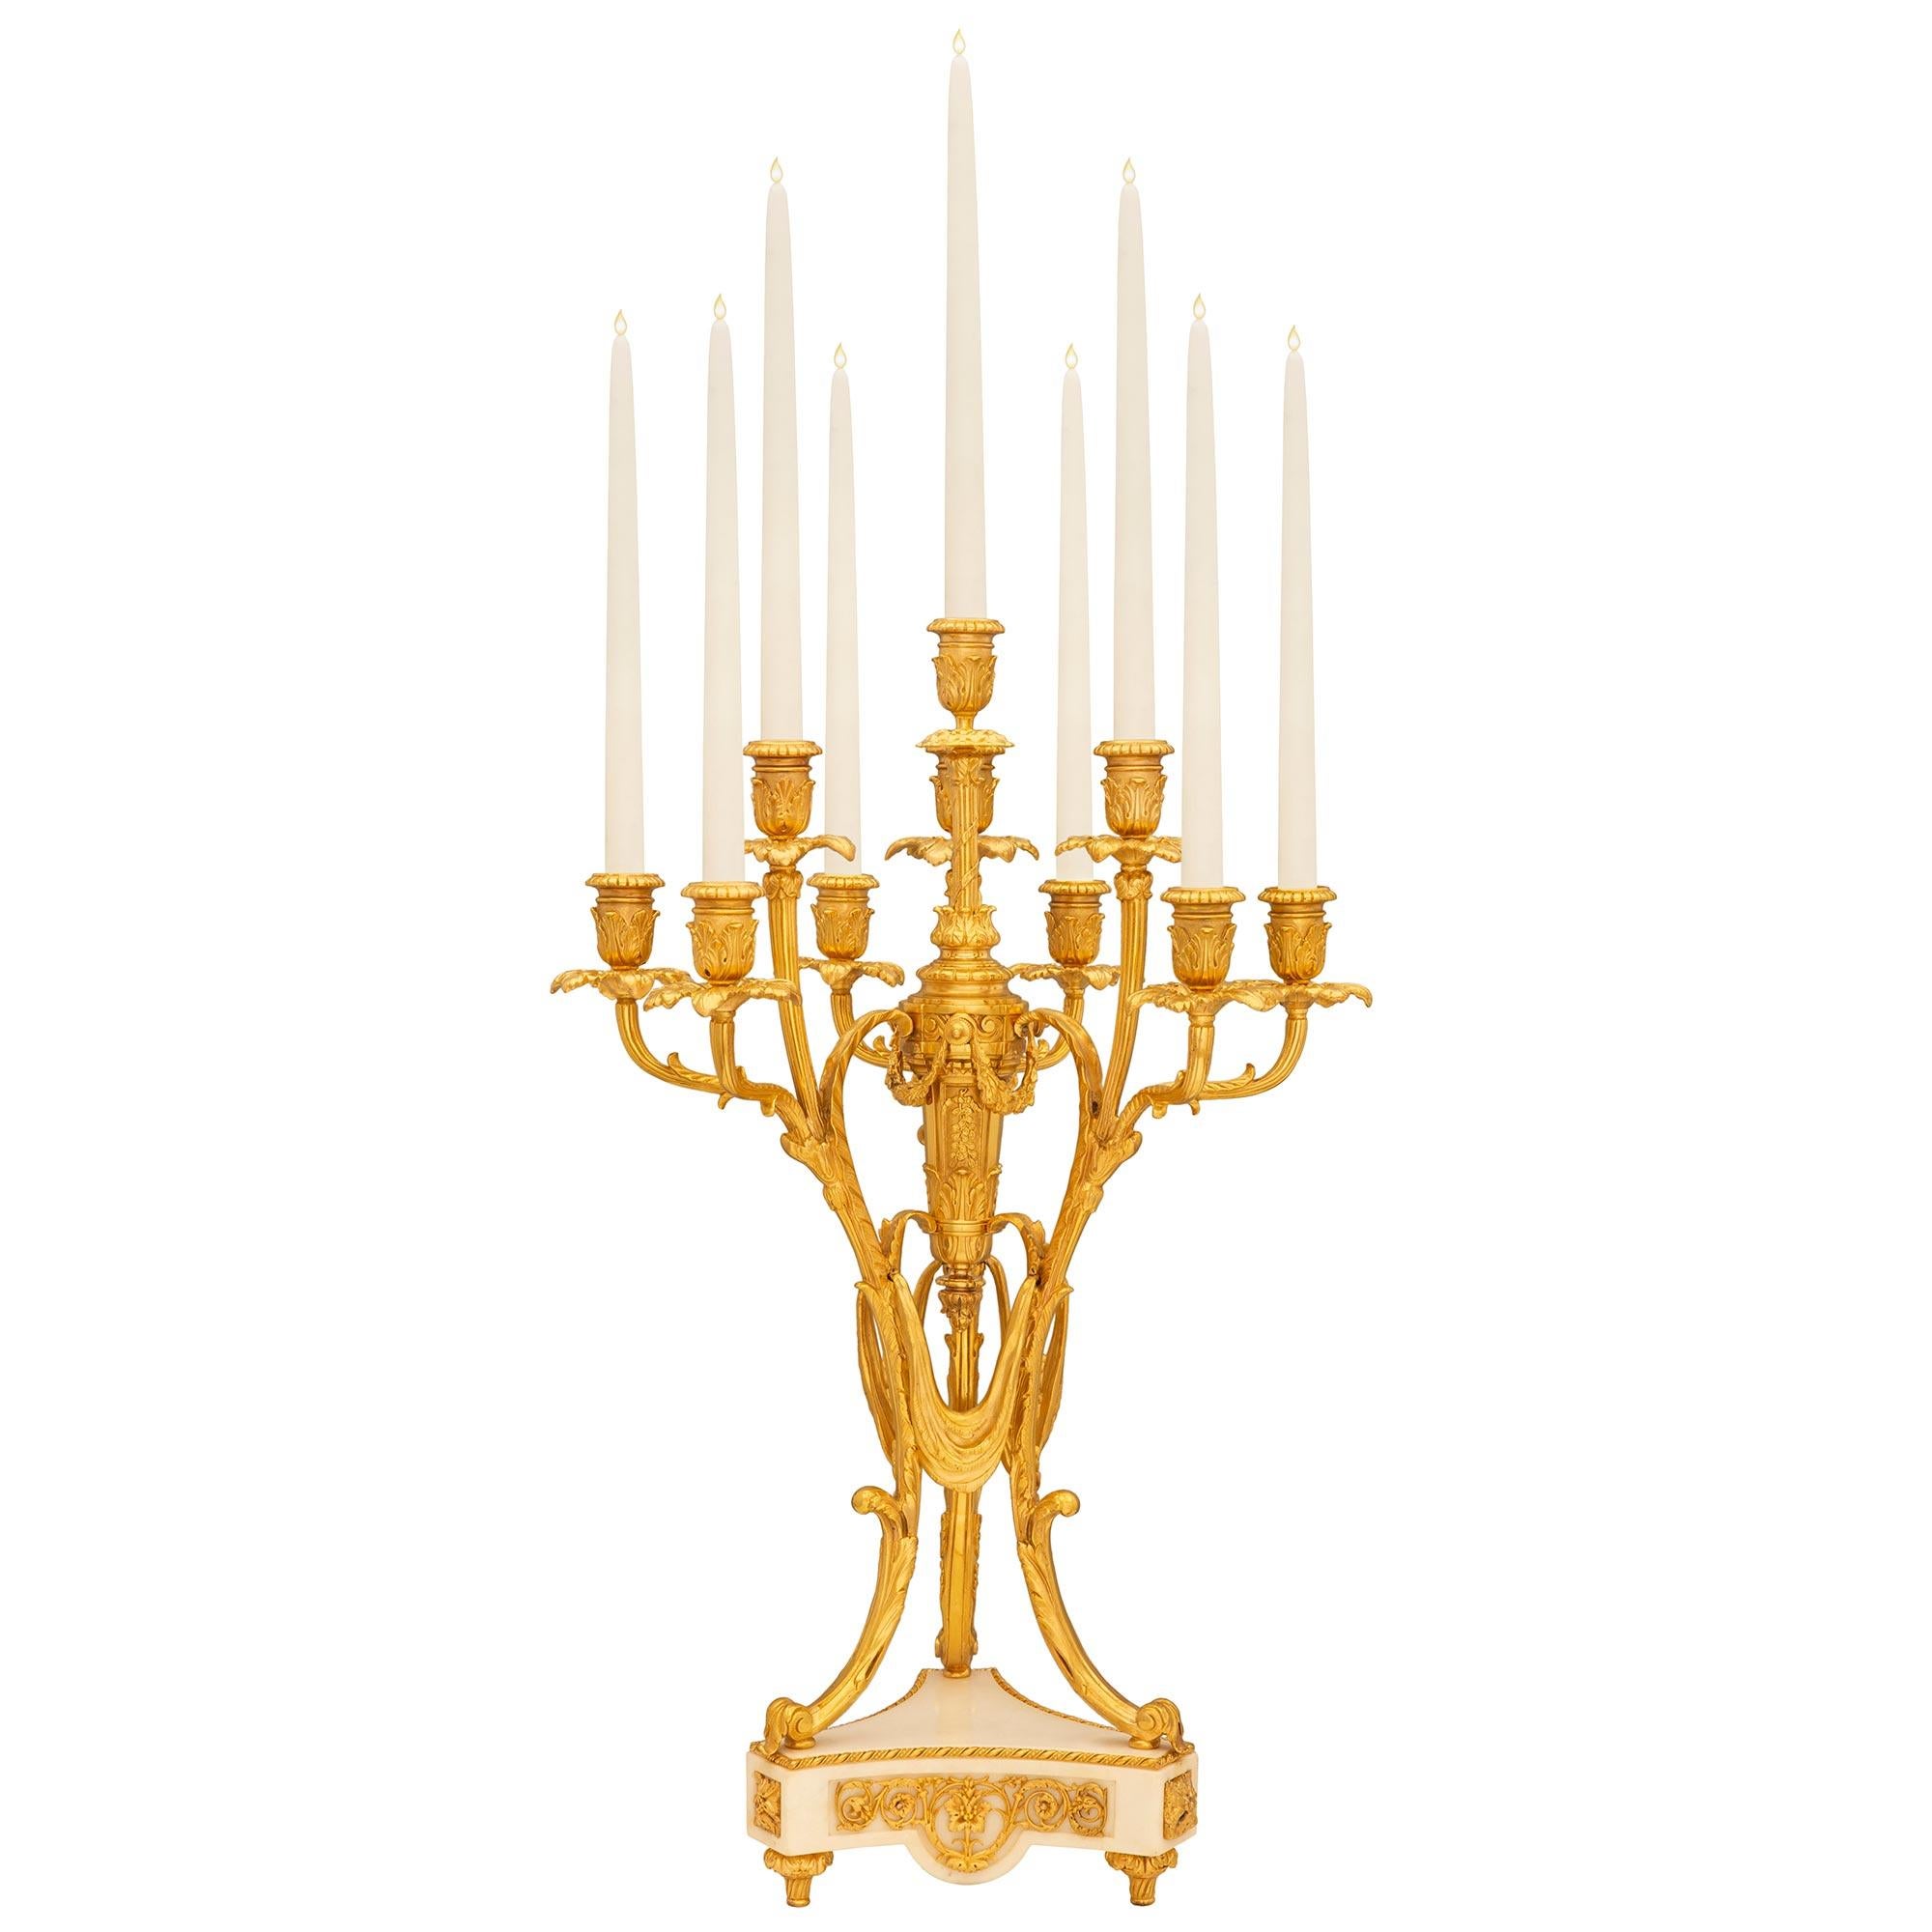 An impressive and high quality pair of French 19th century Louis XVI st. Belle Époque period ormolu and white Carrara marble candelabras. Each ten arm candelabra is raised by a striking triangular white Carrara marble base with fine topie shaped